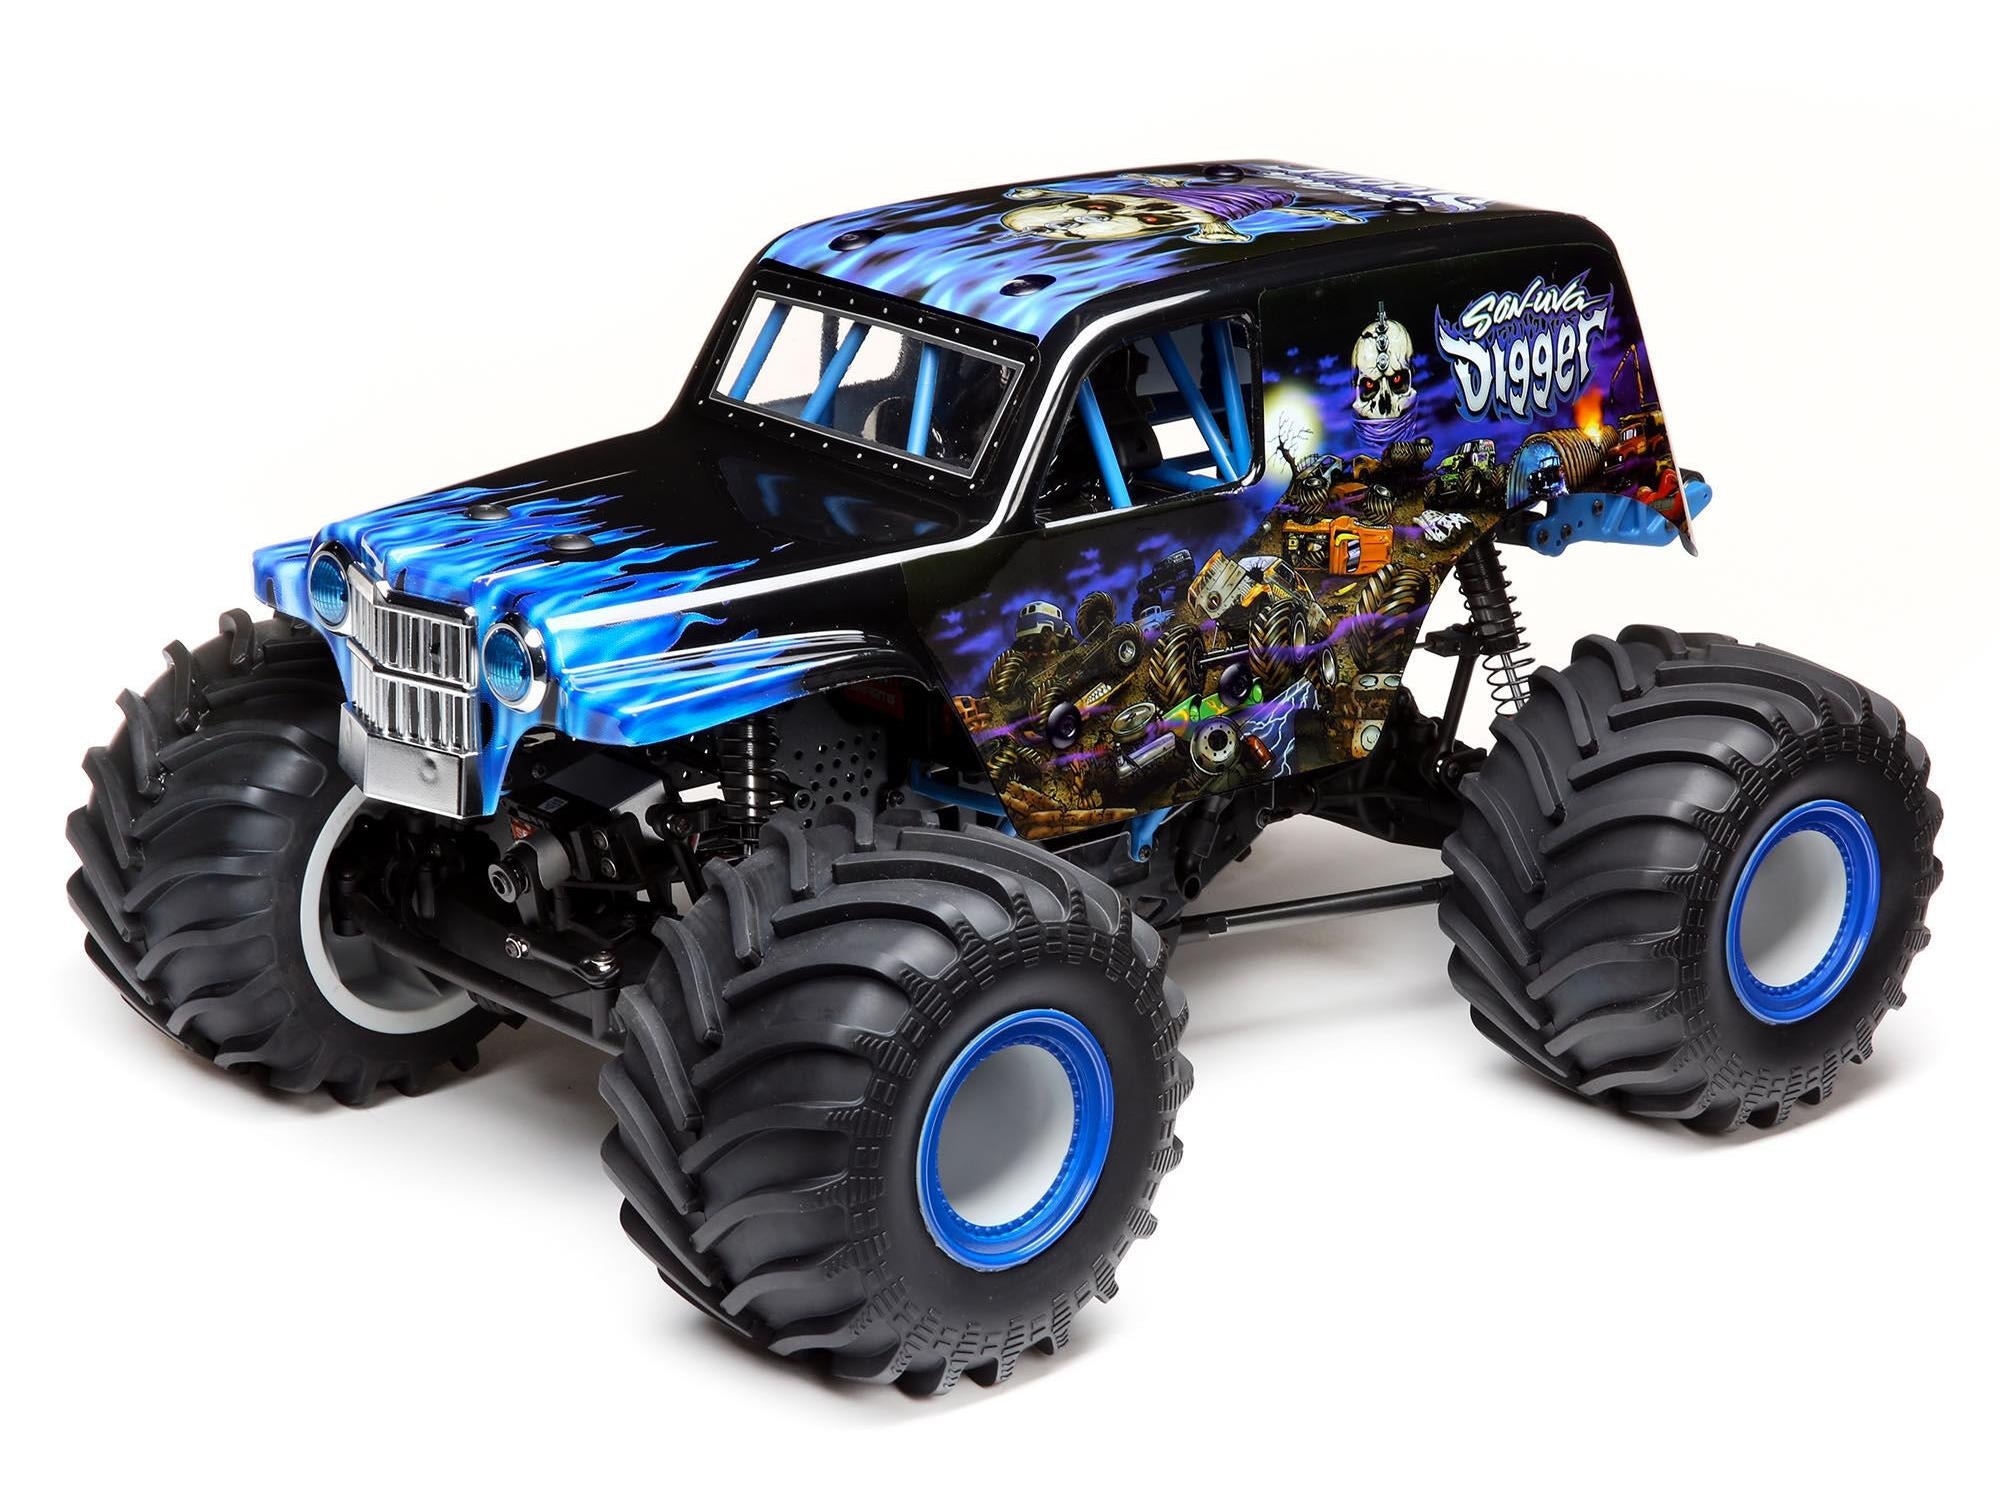 Losi LMT 4WD Solid Axle Monster Truck RTR Son-uva Digger LOS04021T2